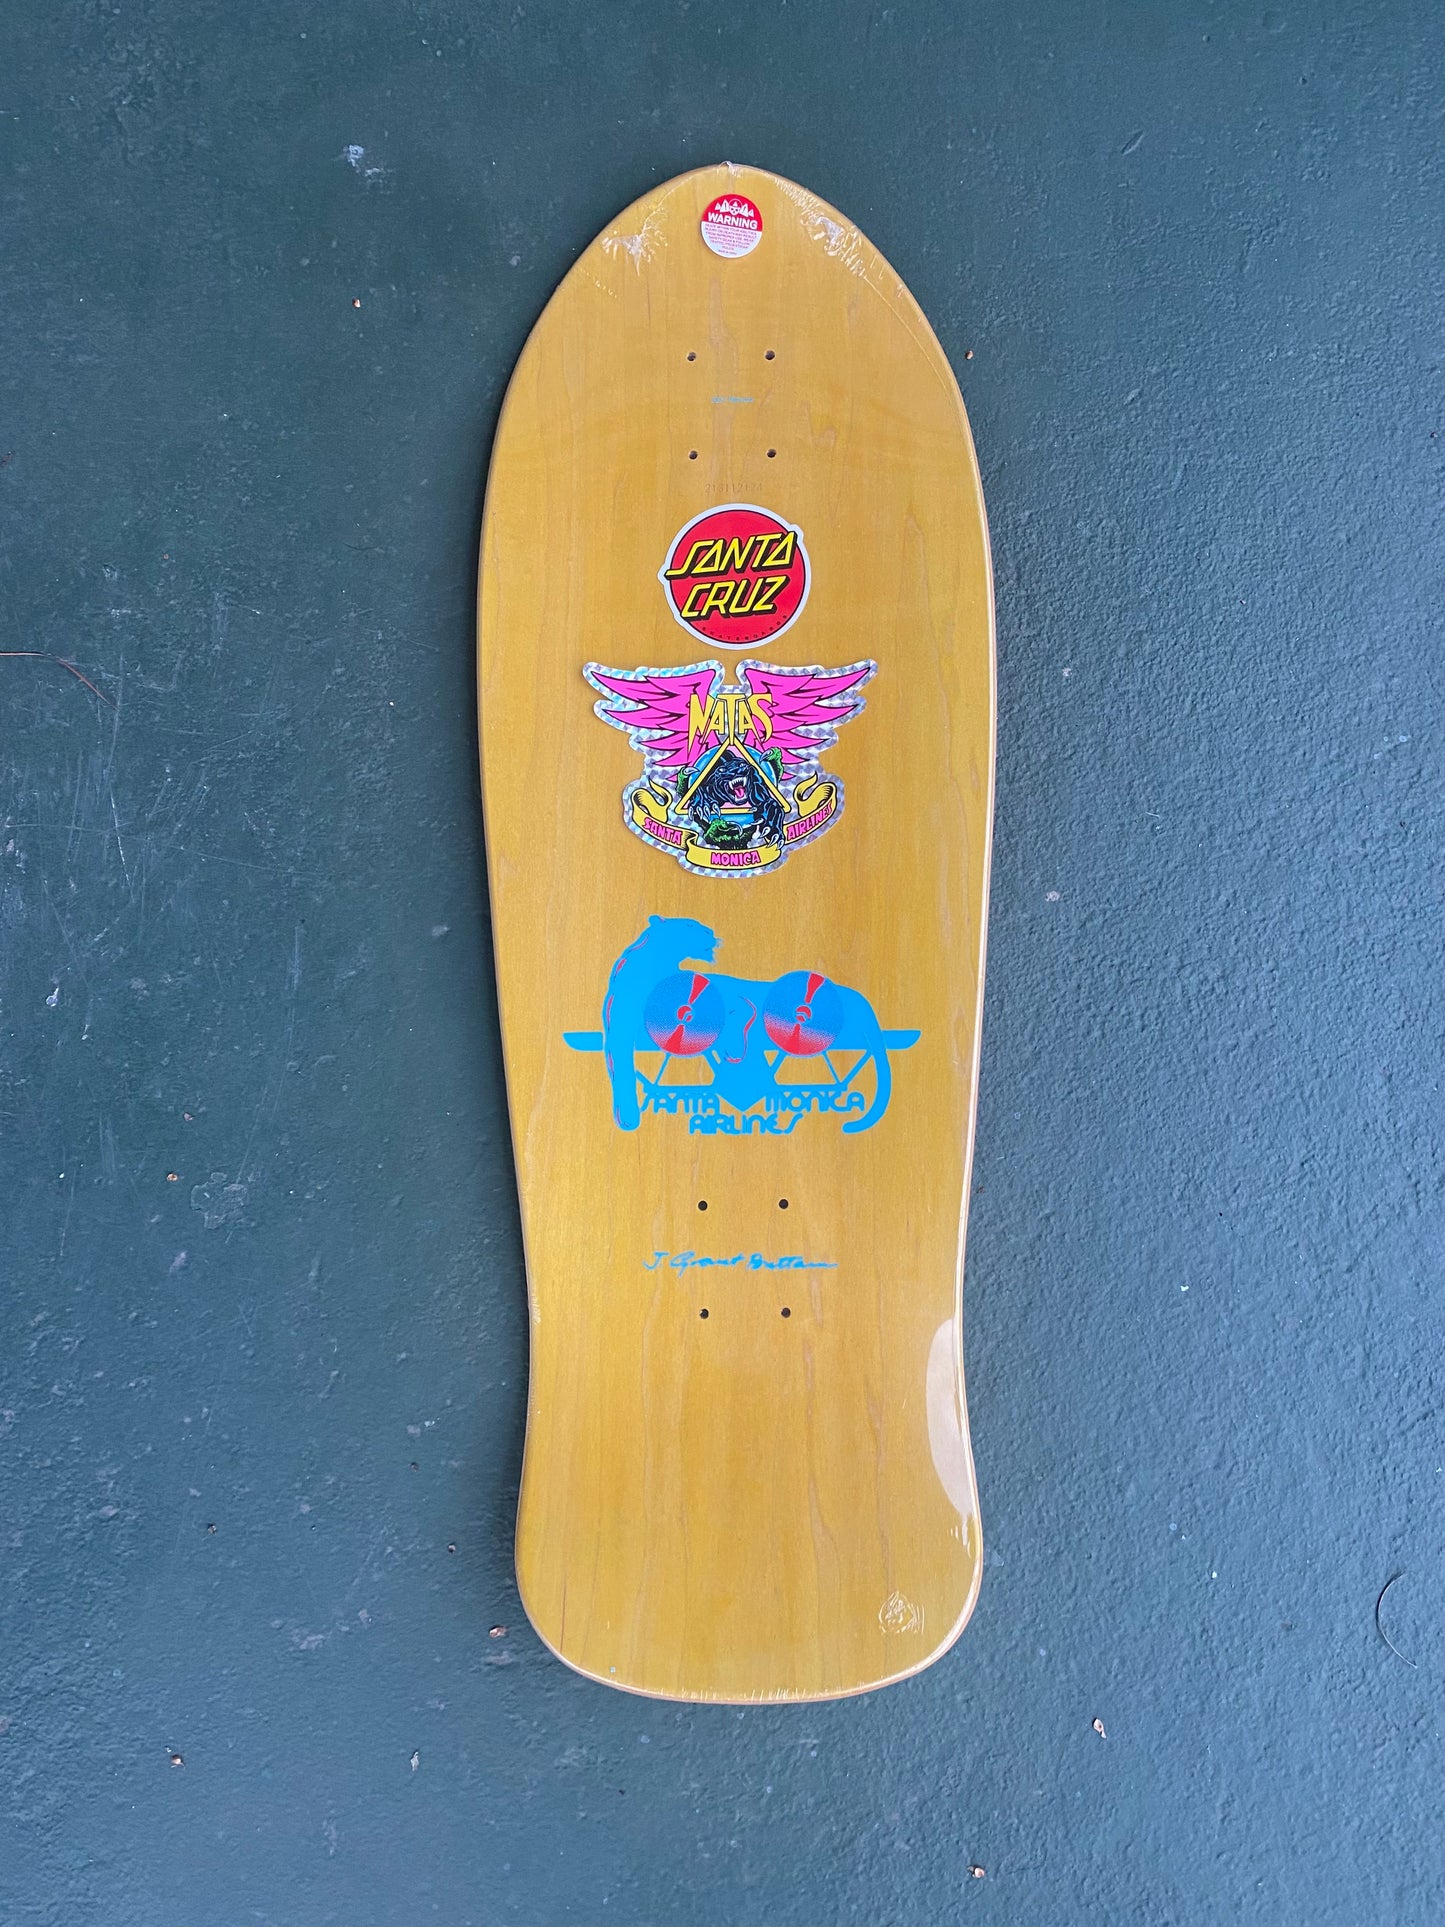 SMA Natas blind bag reissue skateboard deck by Santa Cruz with holographic panther 3 graphics with photo by J. Grant Brittain 10.538in X 30.14in